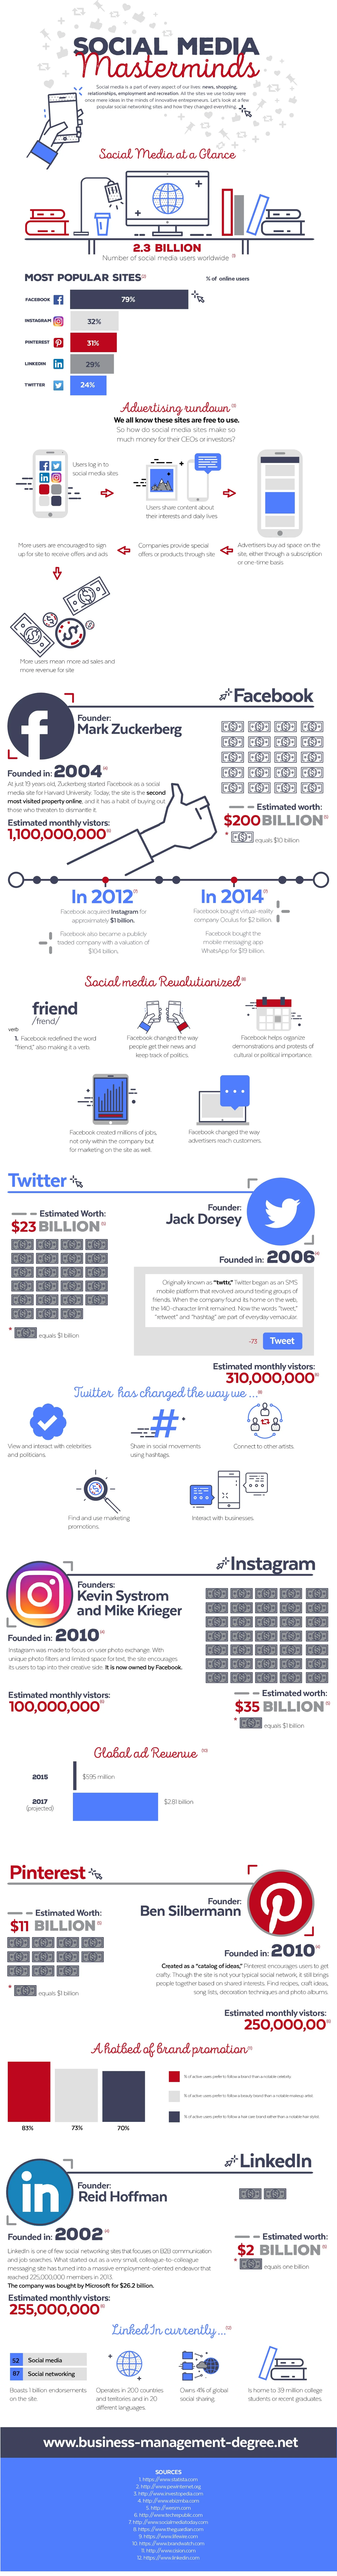 Social Media Masterminds - #infographic